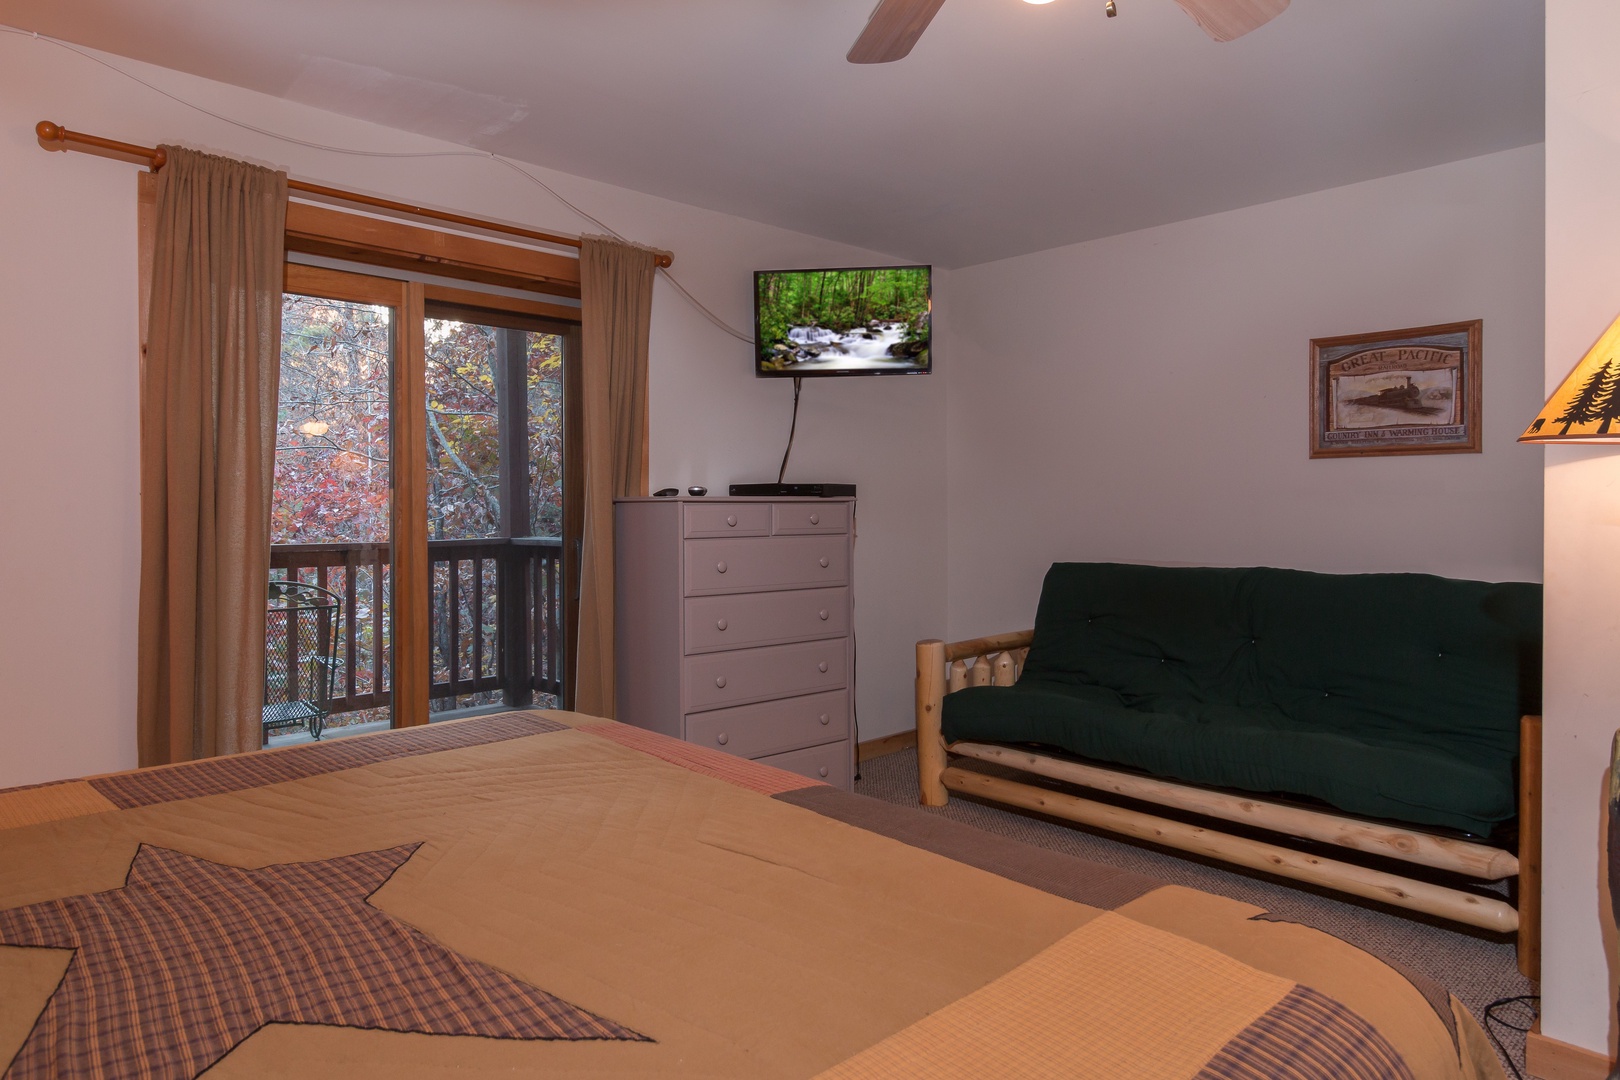 Futon, dresser, TV, and deck access in a bedroom at Just for Fun, a 4 bedroom cabin rental located in Pigeon Forge